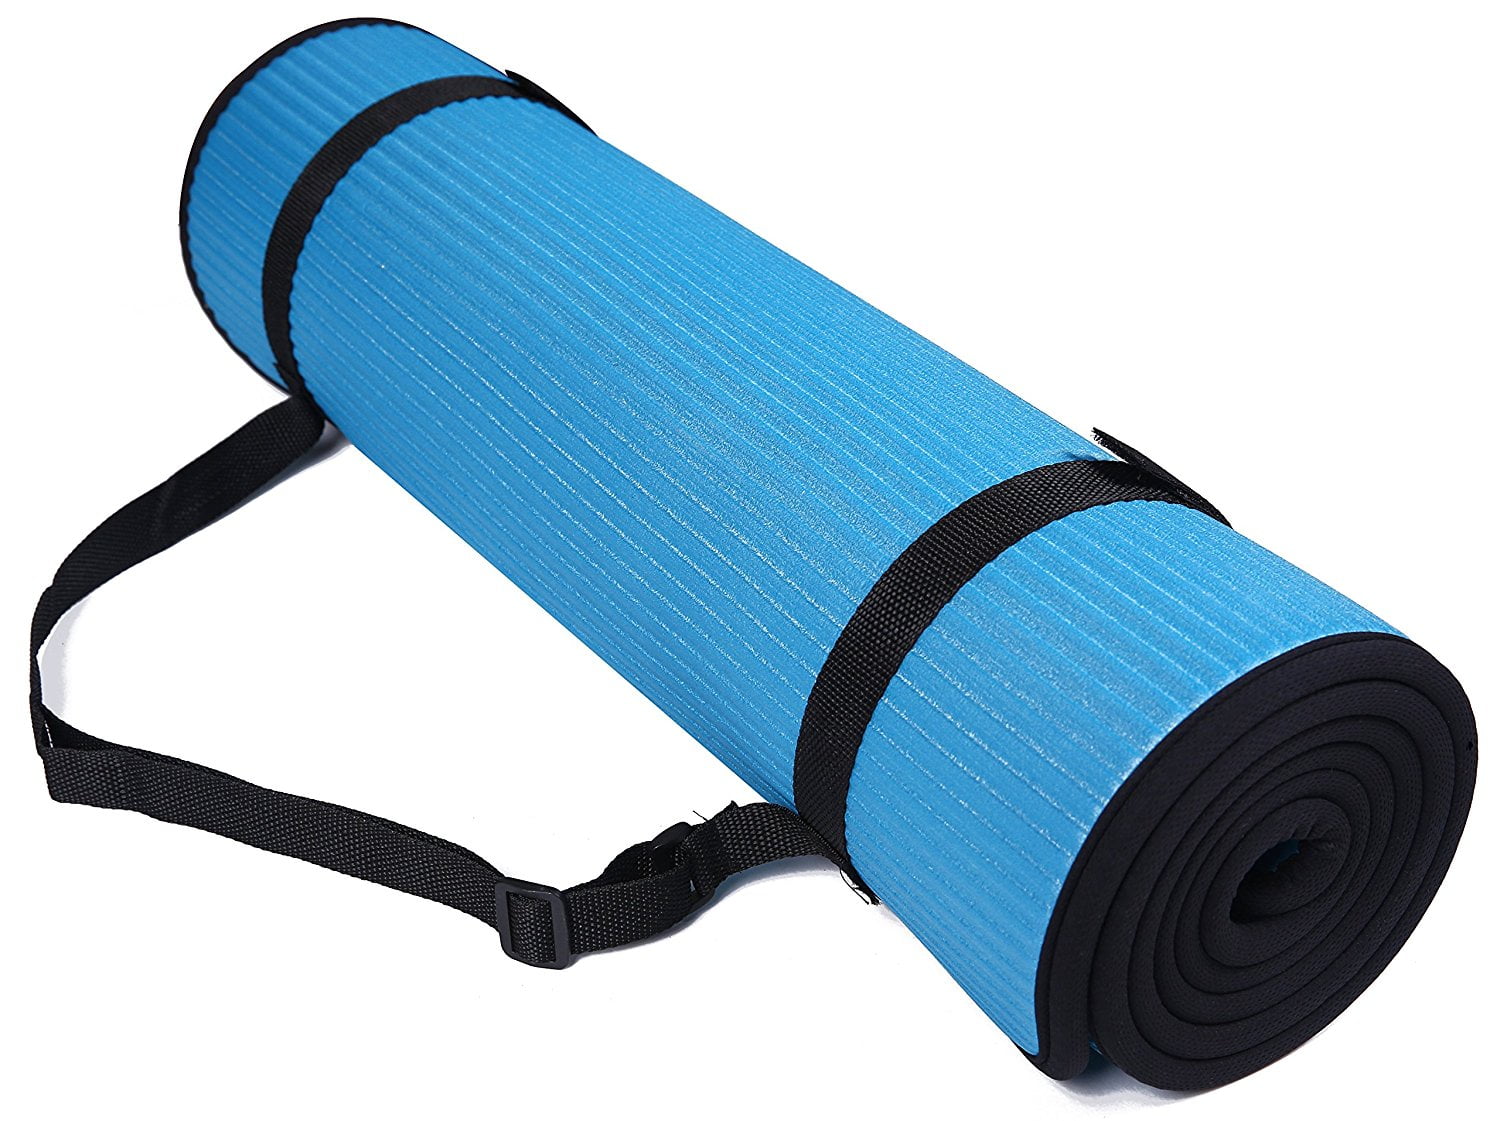 Athletic Works PVC Yoga Mat, 3mm, Dark Gray, 68inx24in, Nonslip, Cushioning  for Support and Stability 